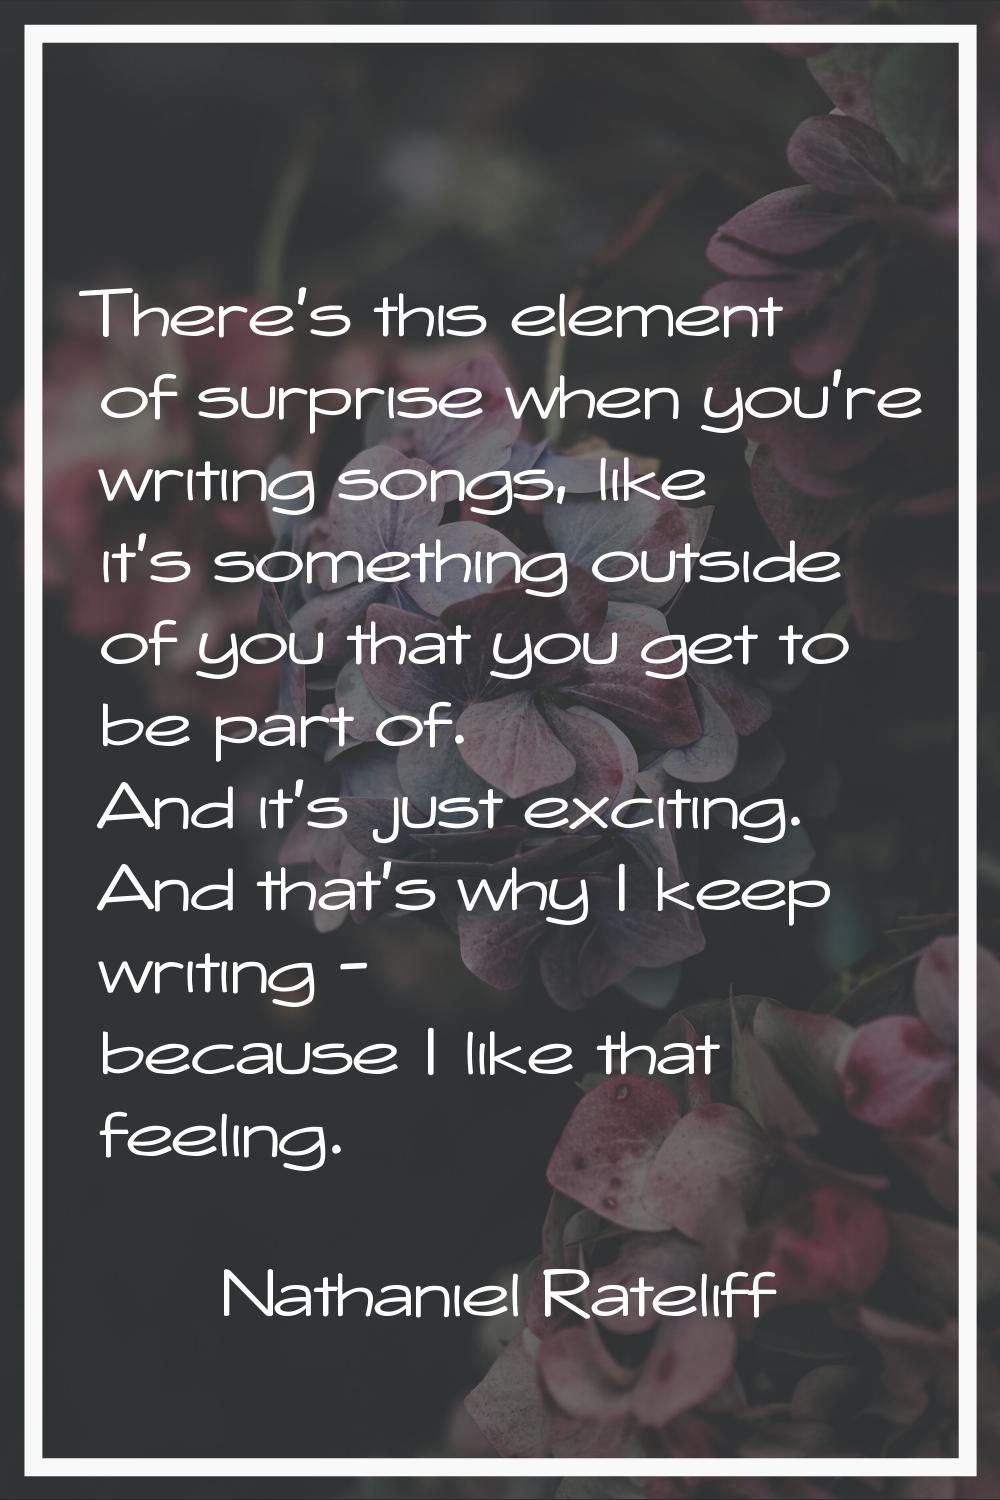 There's this element of surprise when you're writing songs, like it's something outside of you that